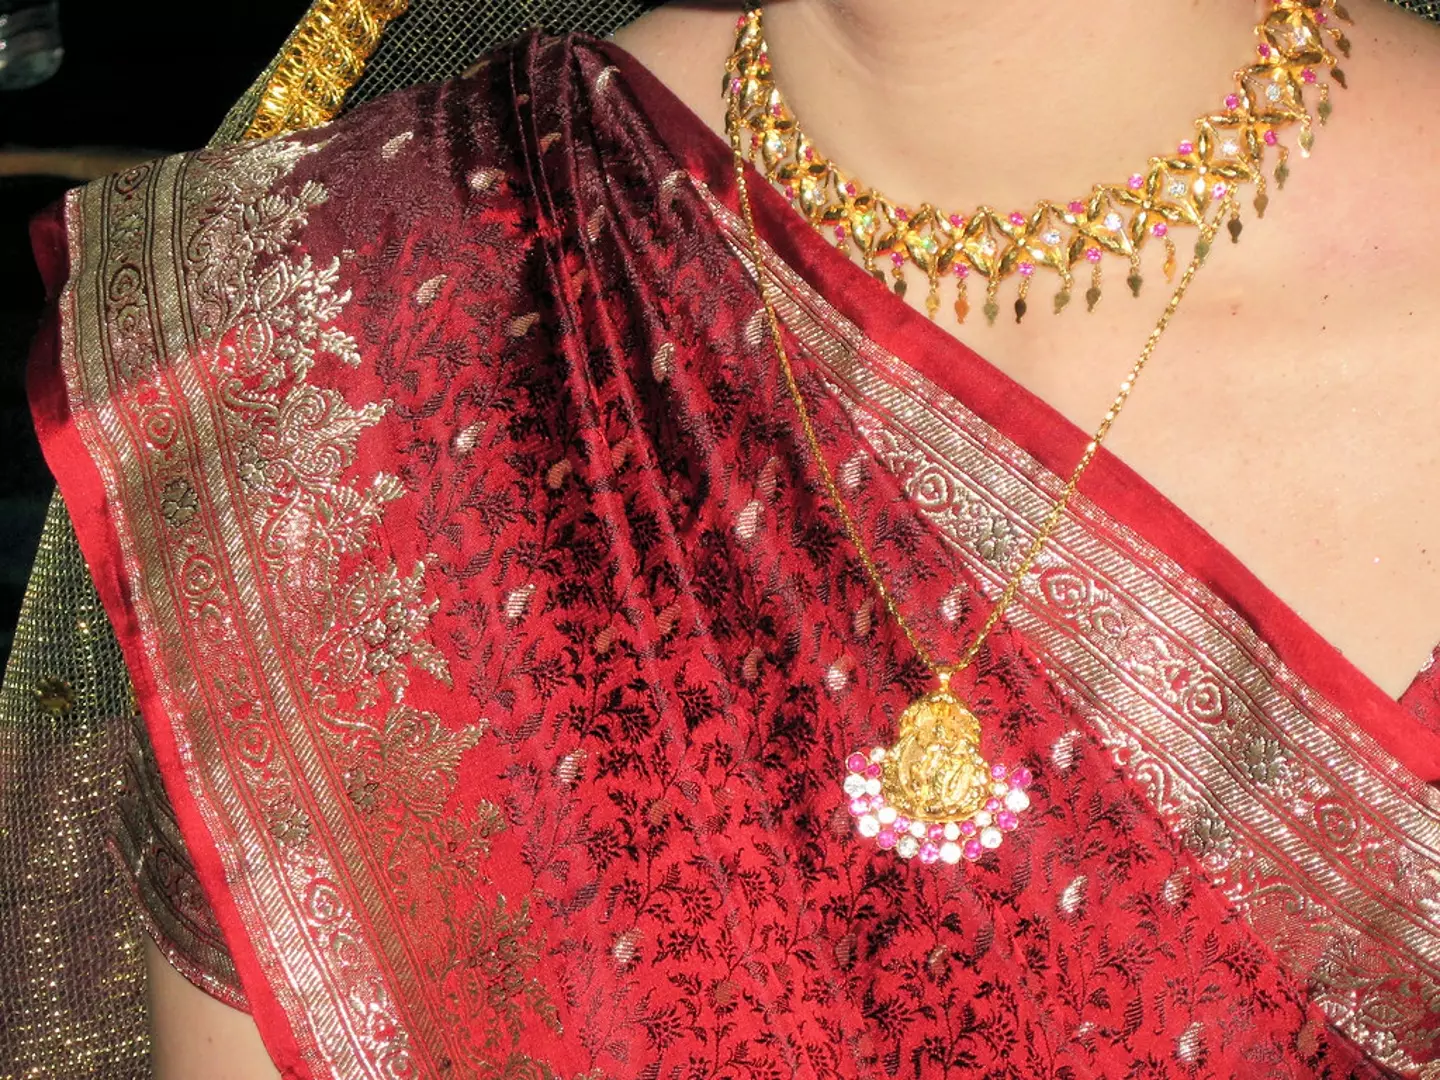 Jewellery and a gown from an Indian wedding.